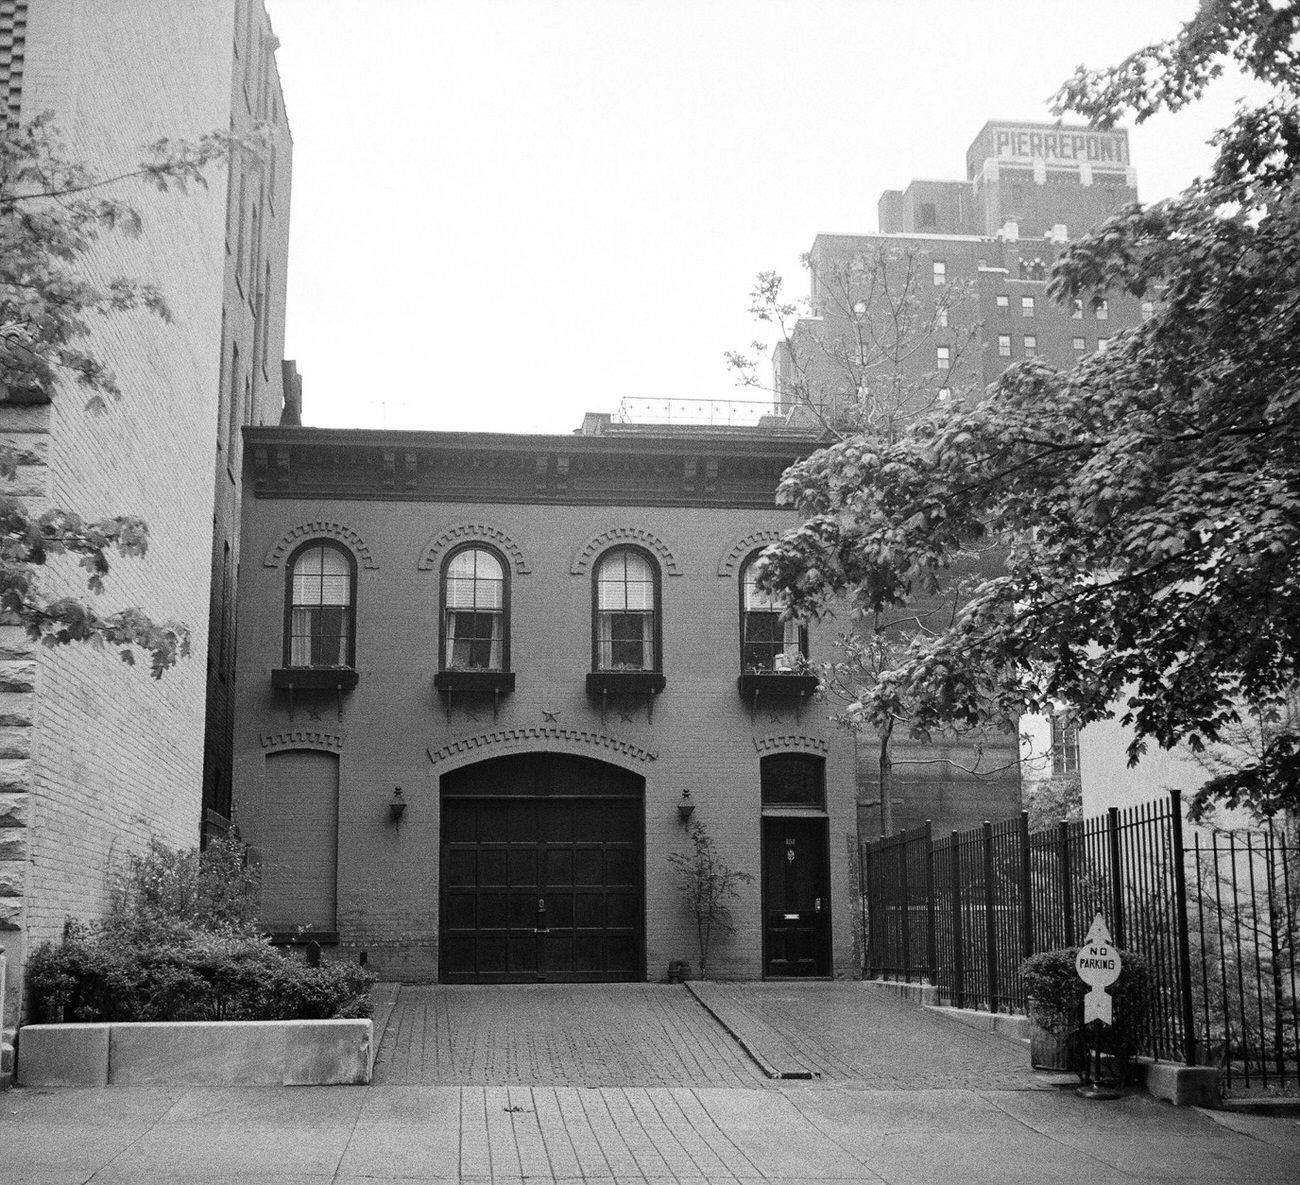 Van Anden Family Carriage House On Willow Street In Brooklyn Heights, 1958.